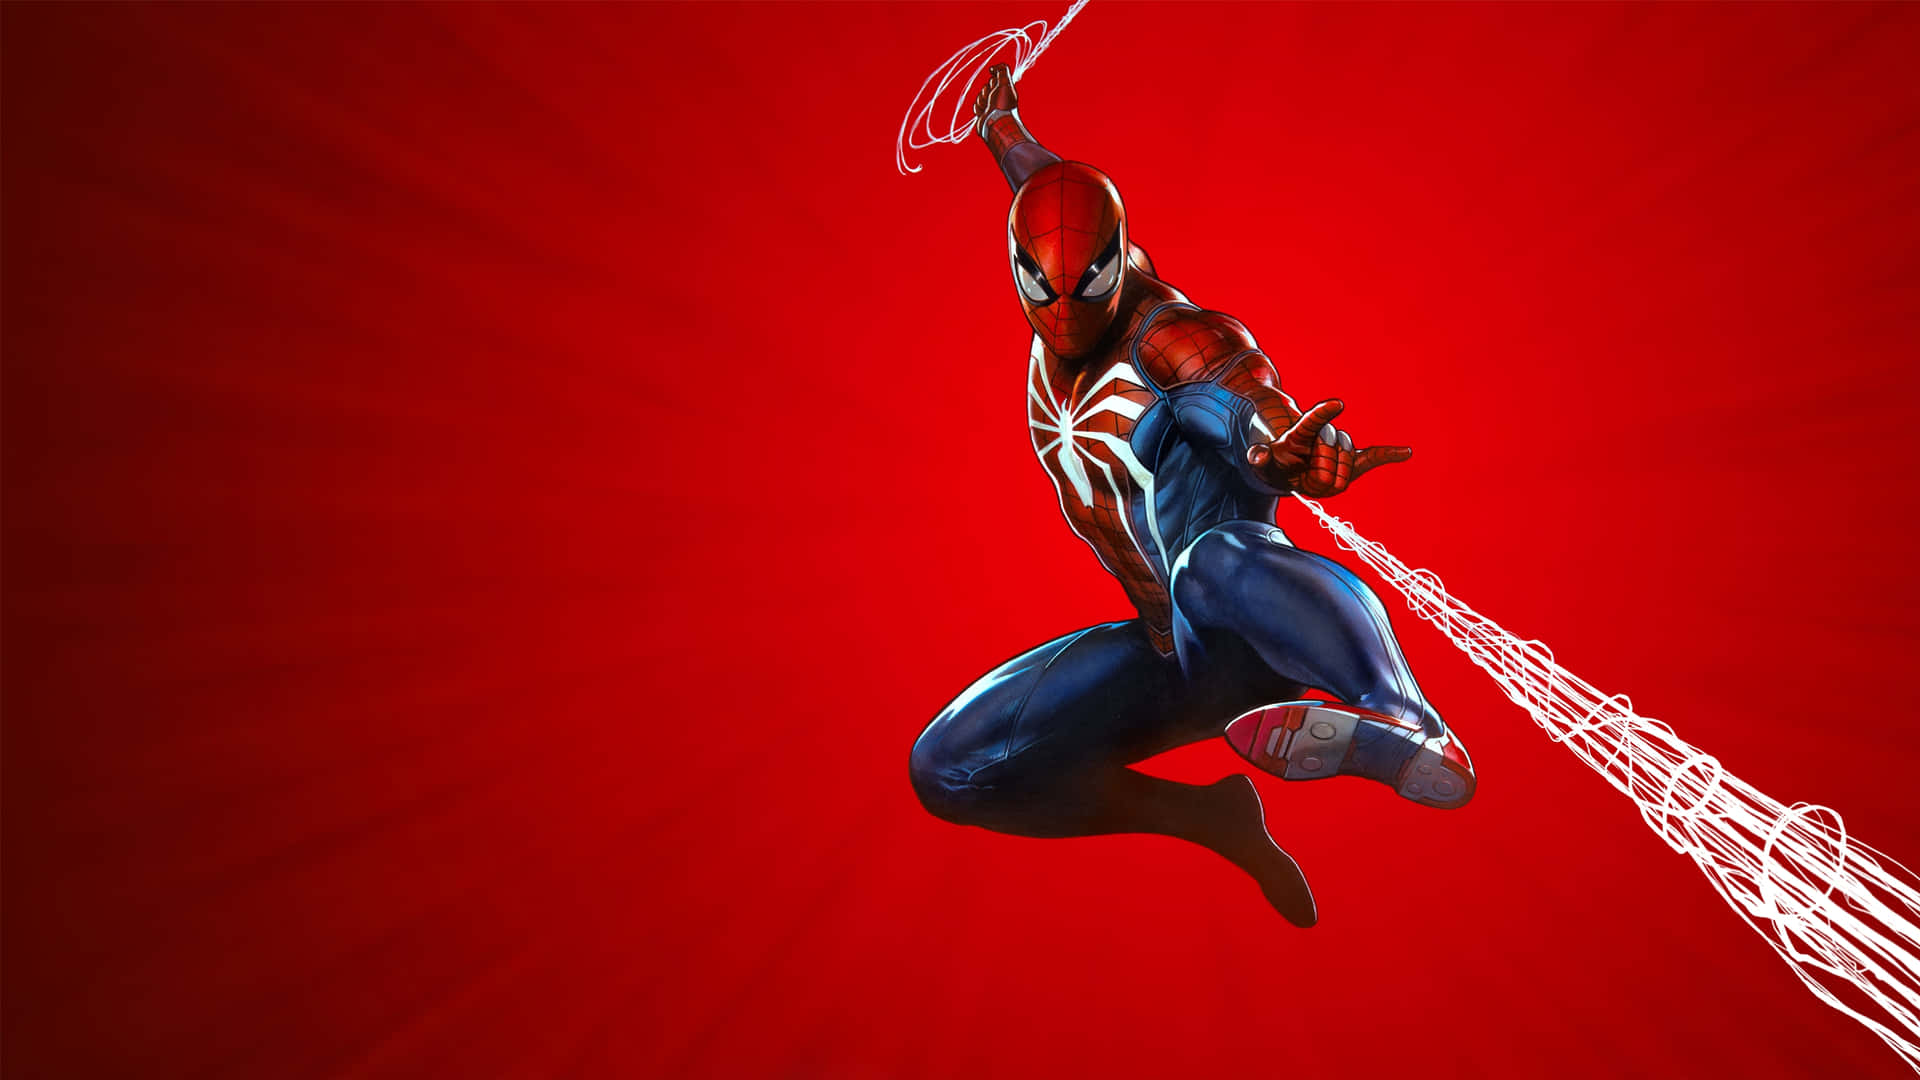 Cool Ps4 Game Character Spider-man With Famous Jump Pose Wallpaper